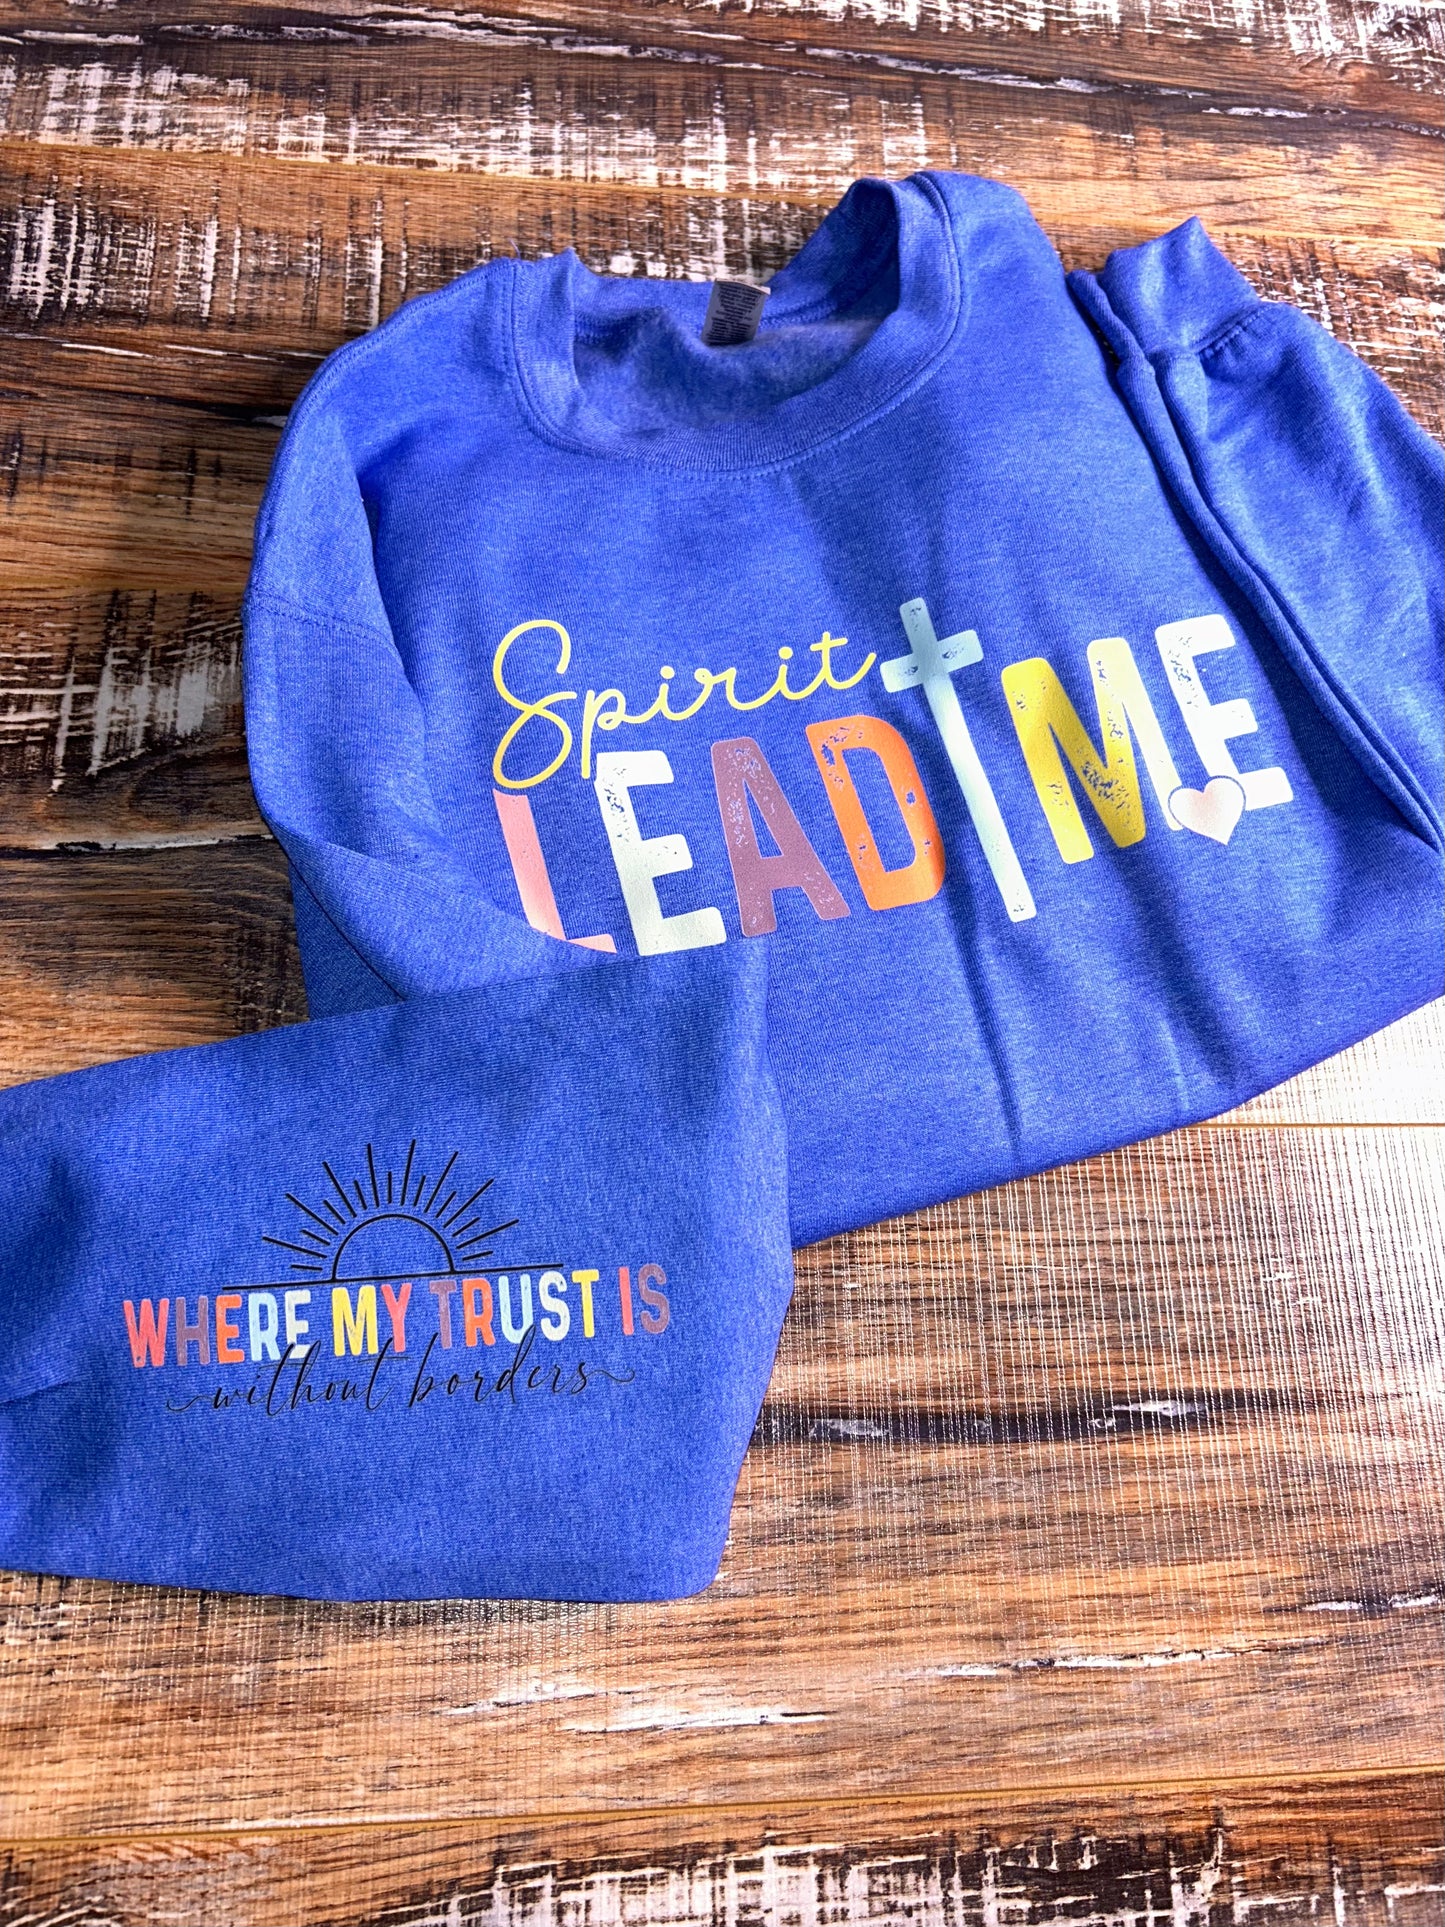 SPIRIT LEAD ME where my trust is without borders  - Christian sweatshirt - Christian apparel